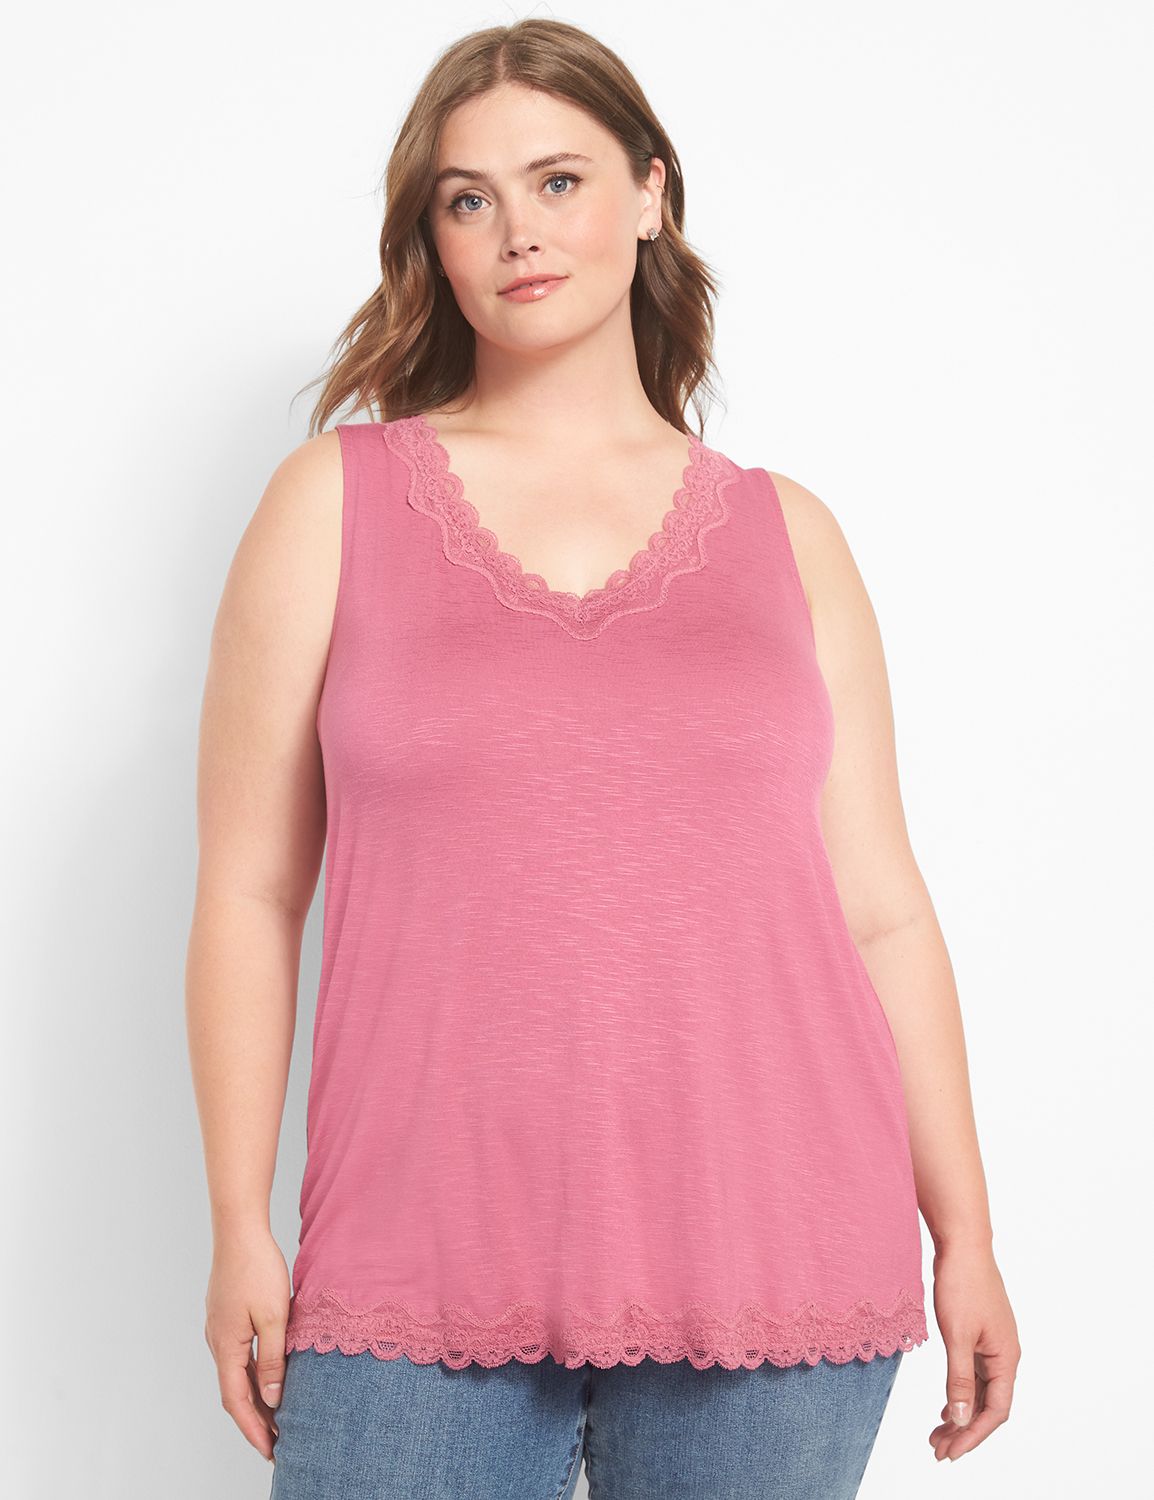 pink ribbon lace cami, Women's Fashion, Tops, Sleeveless on Carousell